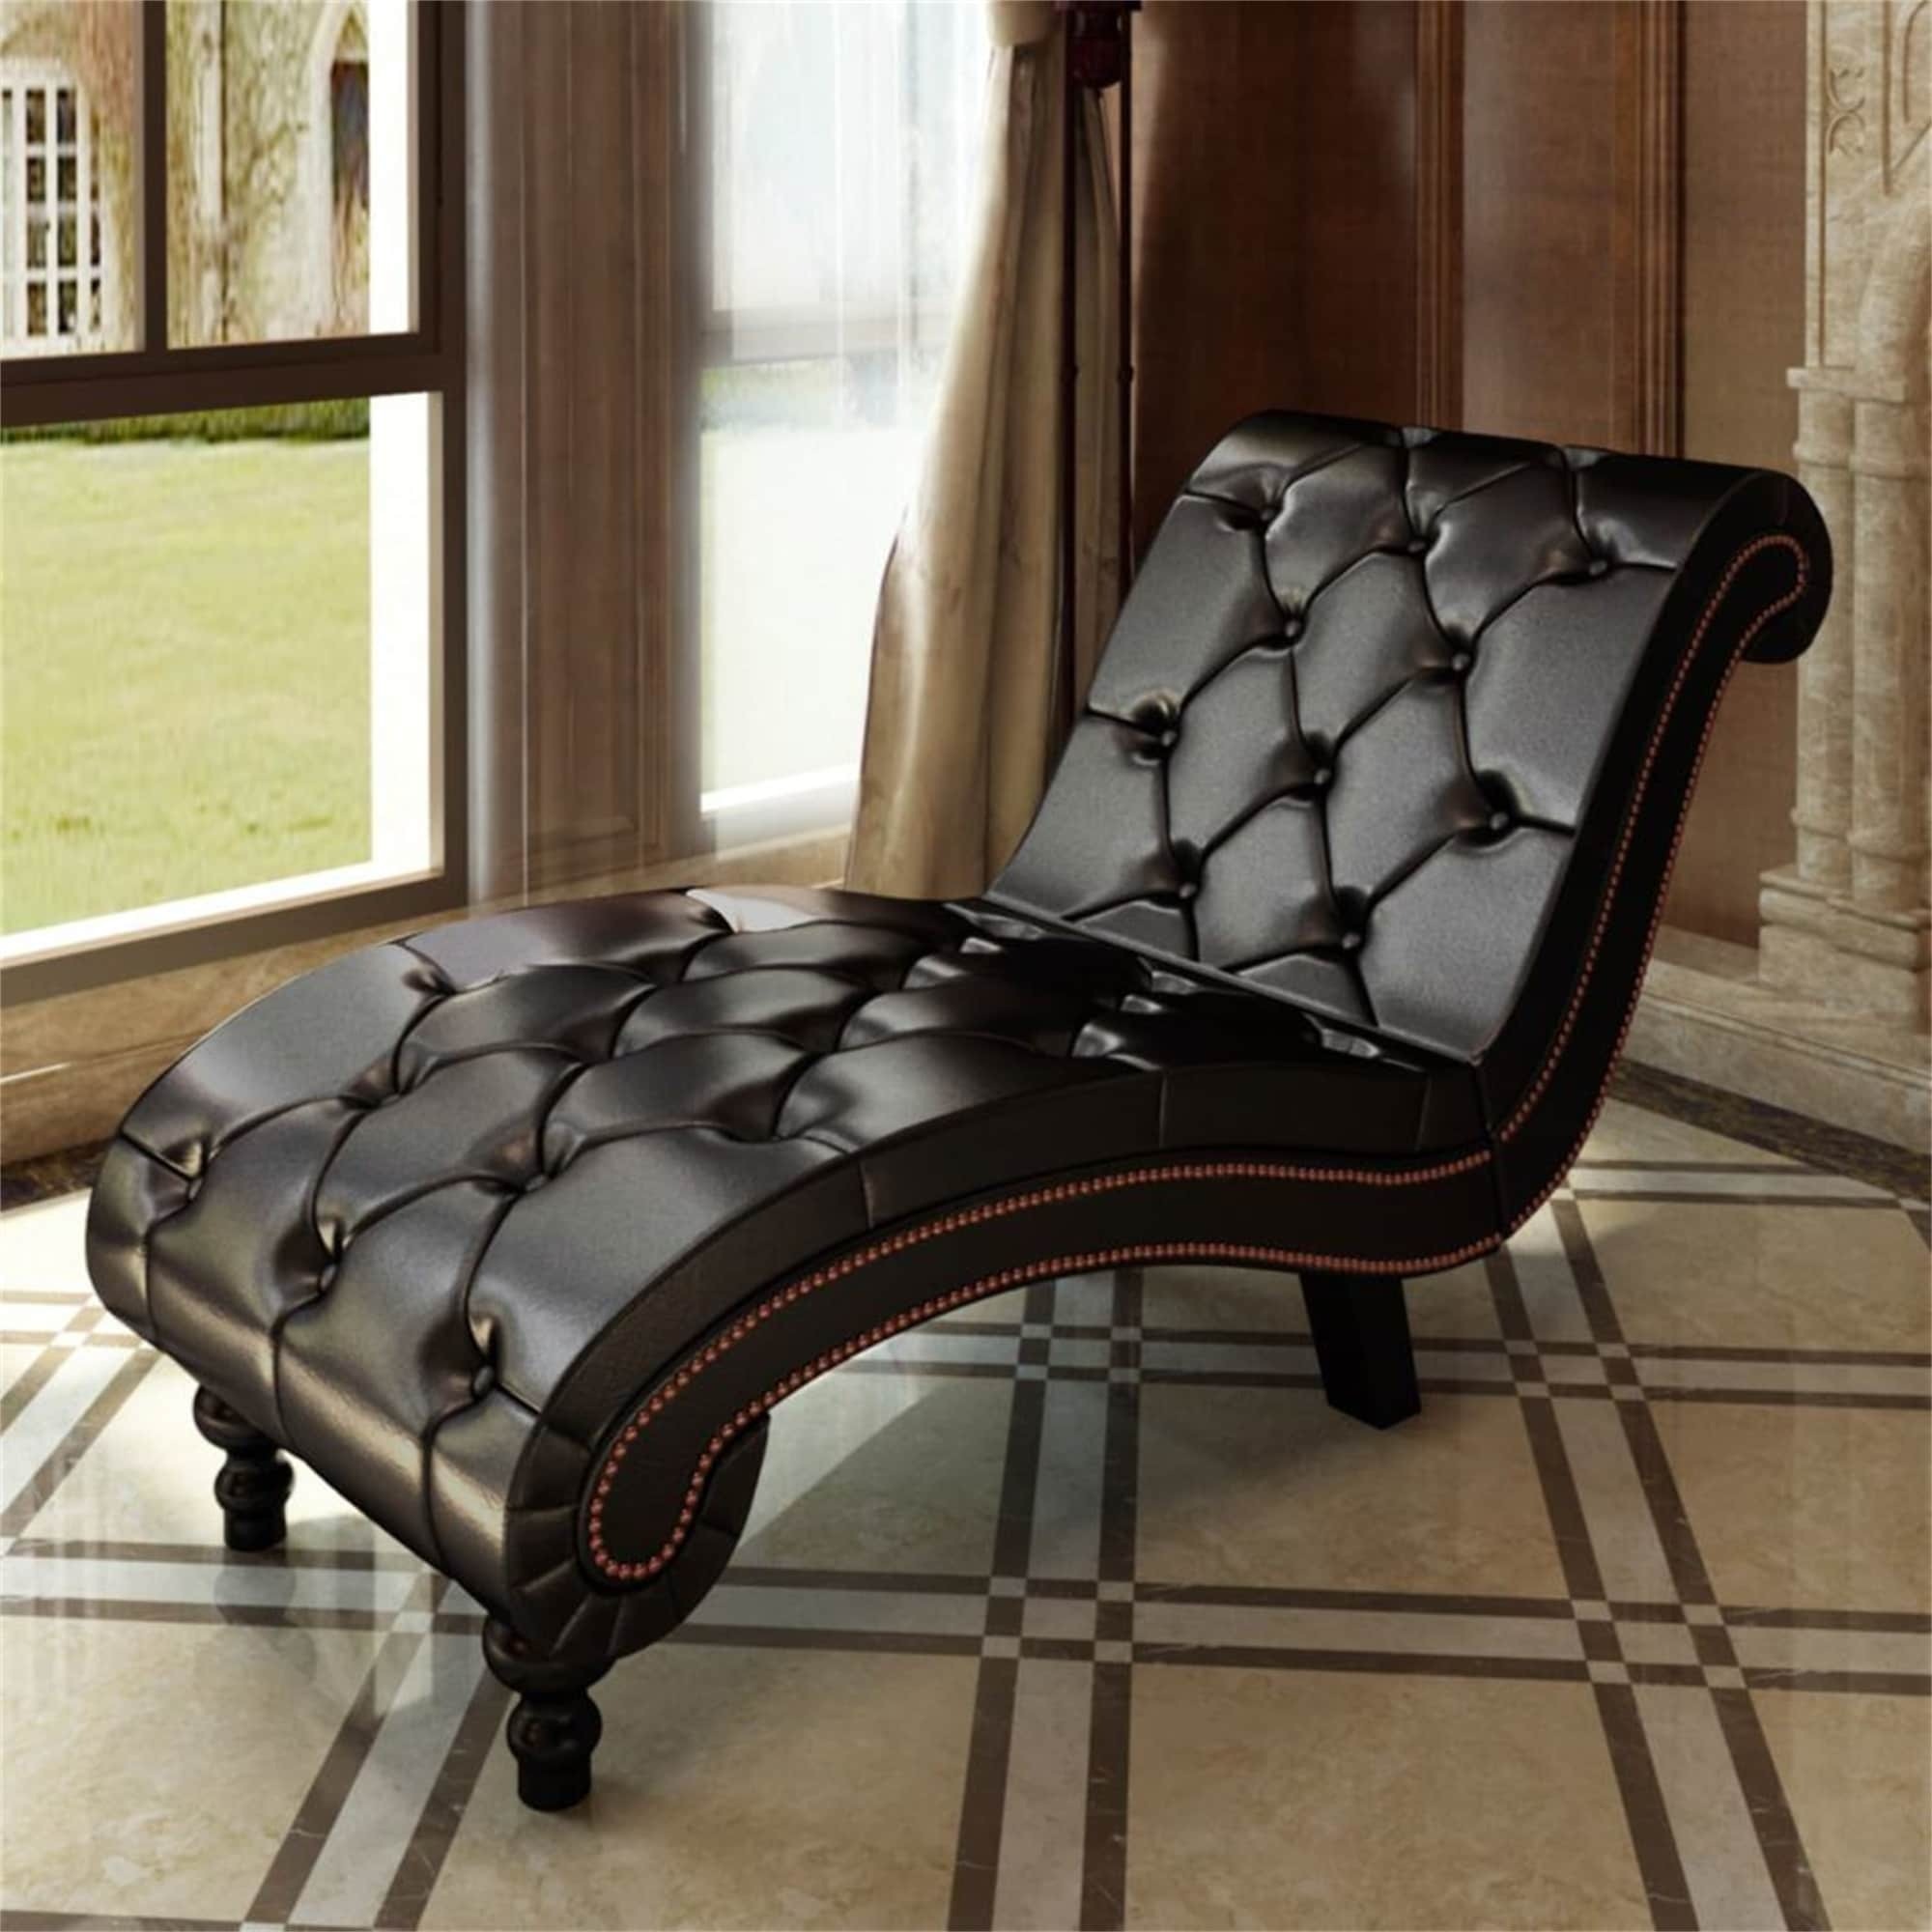 Majestic leather double chaise lounge